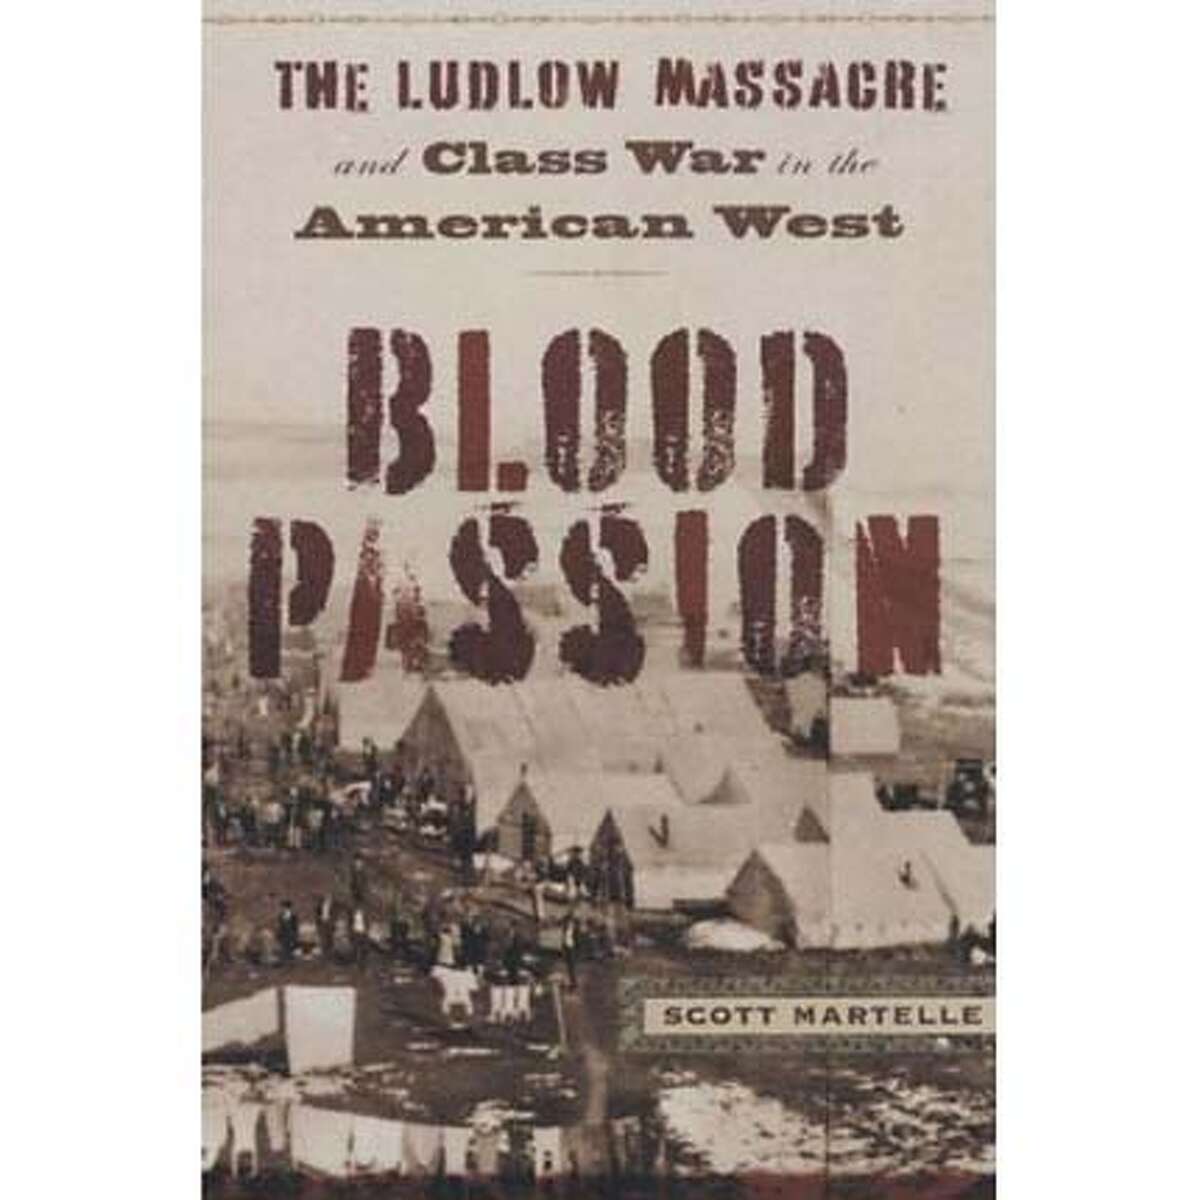 "Blood Passion: The Ludlow Massacre and Class War in the American West" by Scott Martelle